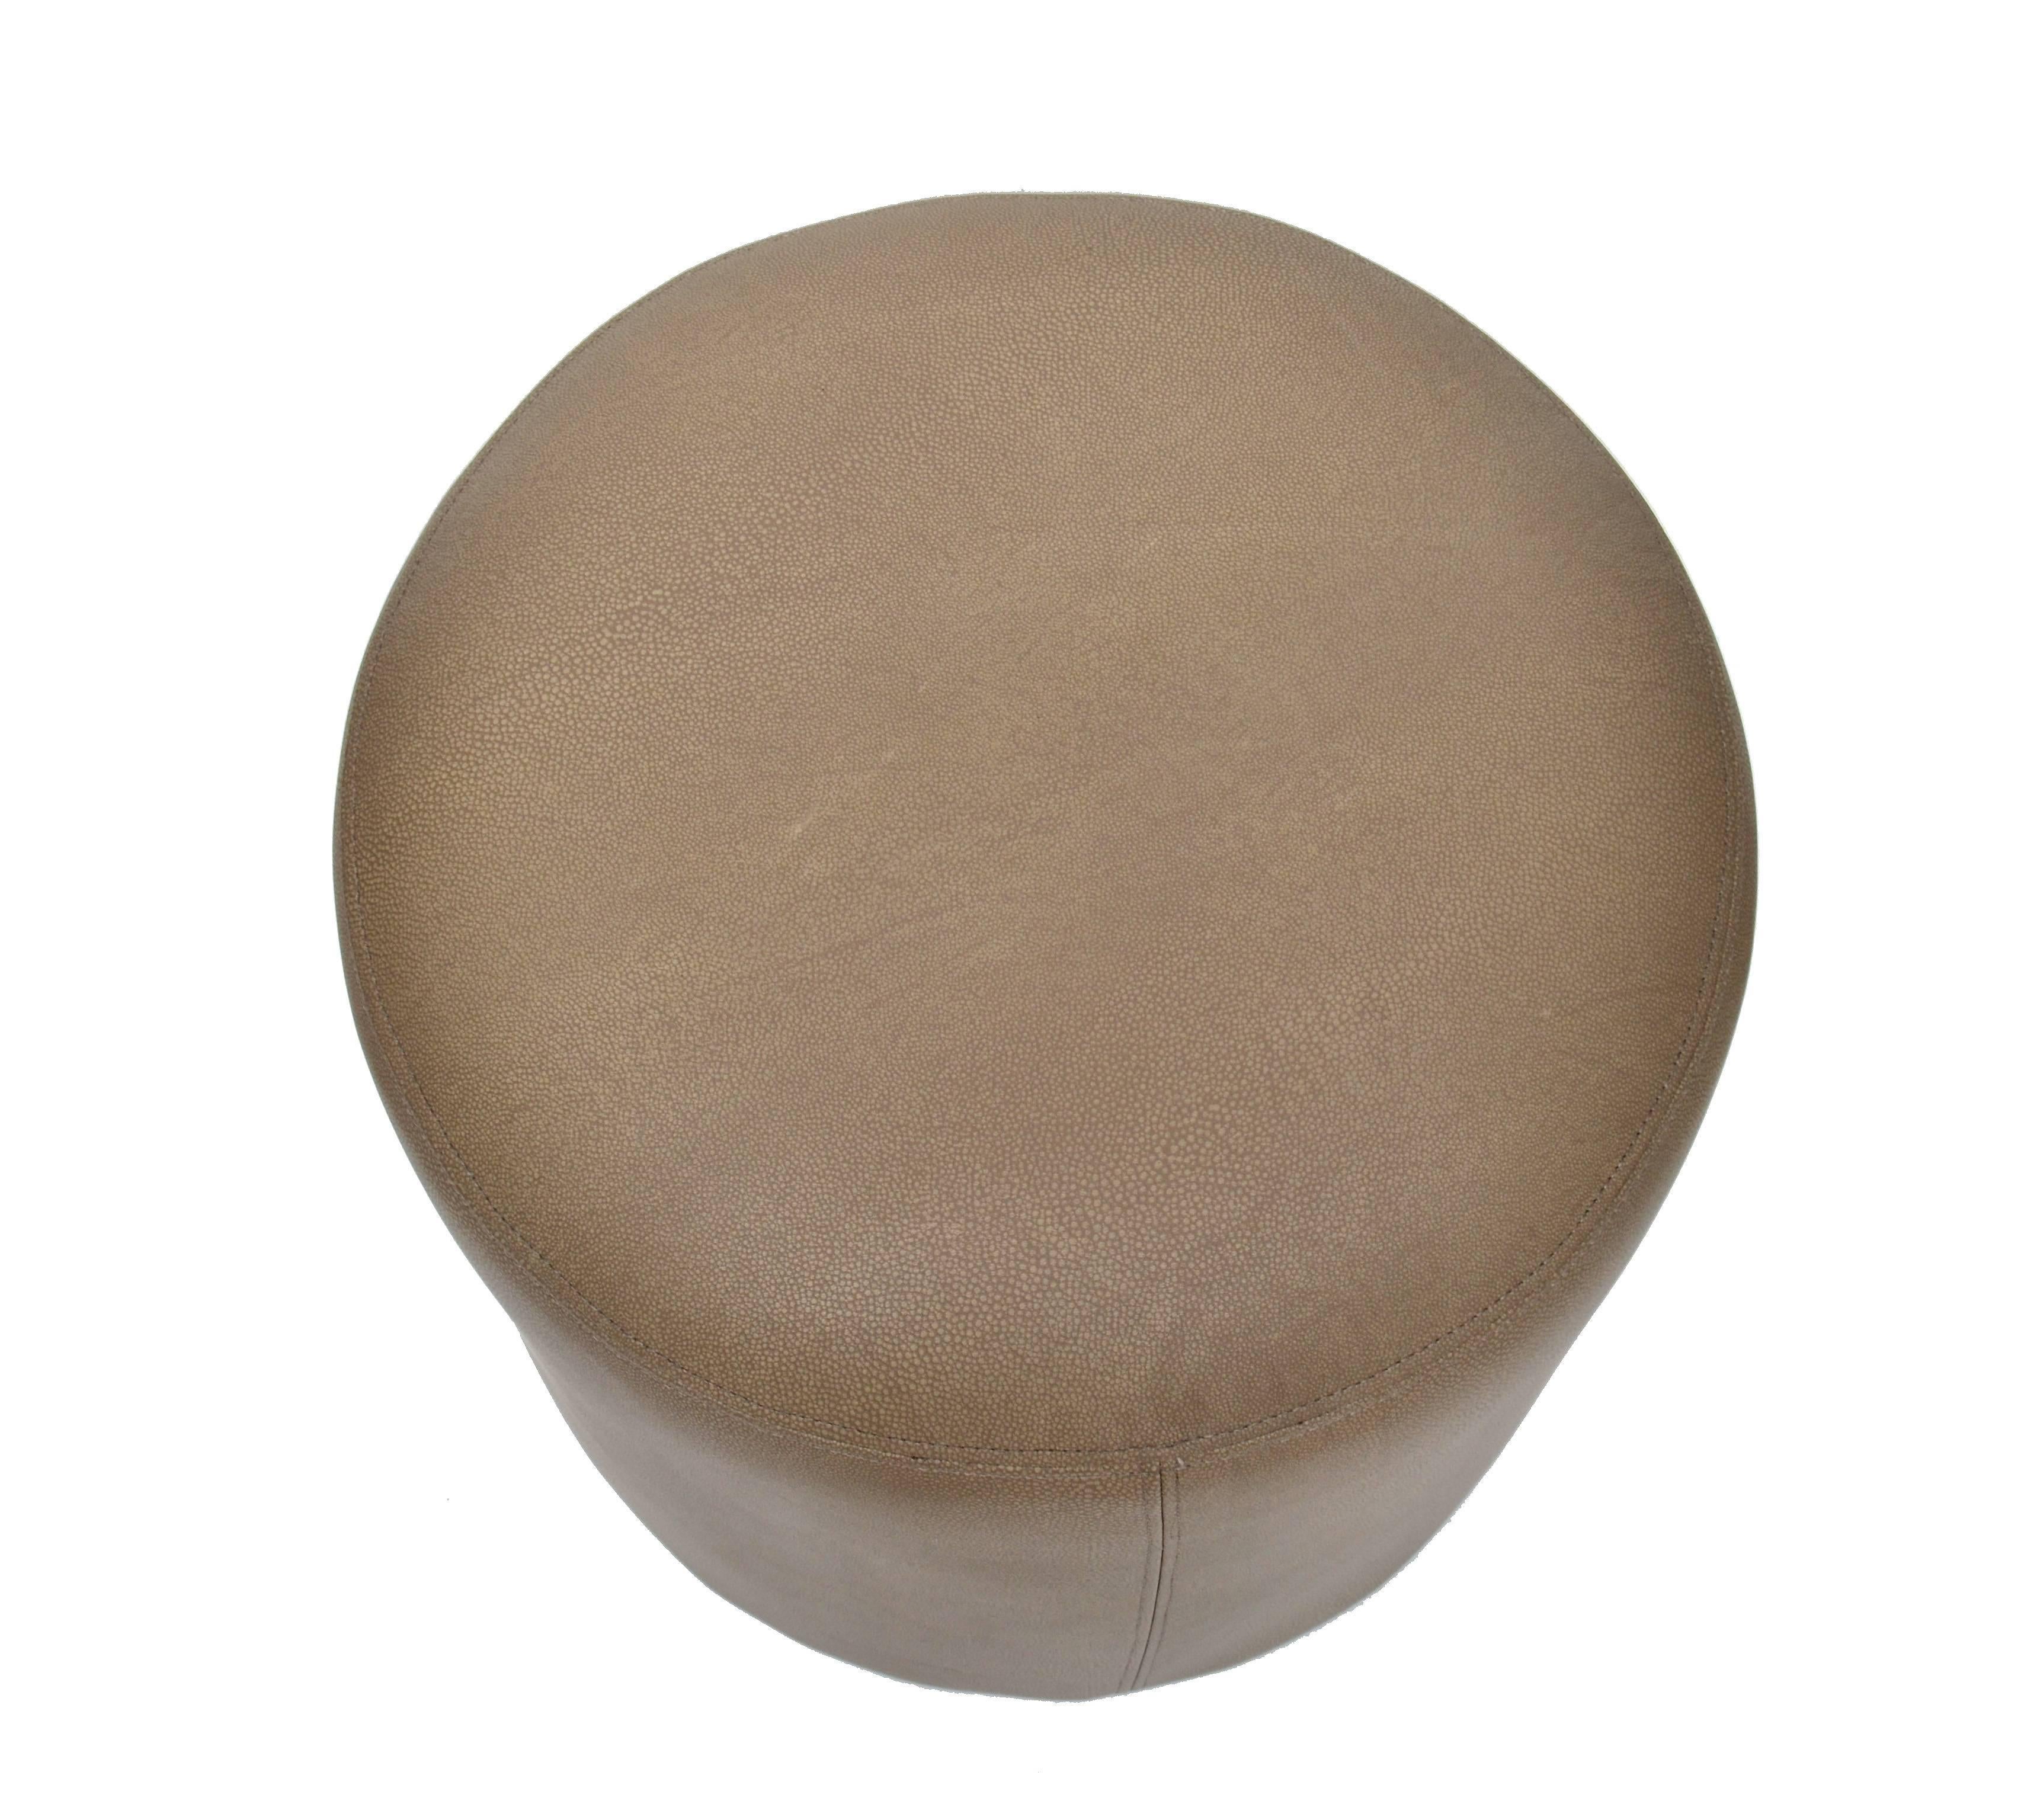 Modern round shagreen leather ottoman.
Can be used as footstool or as a pouf.
 